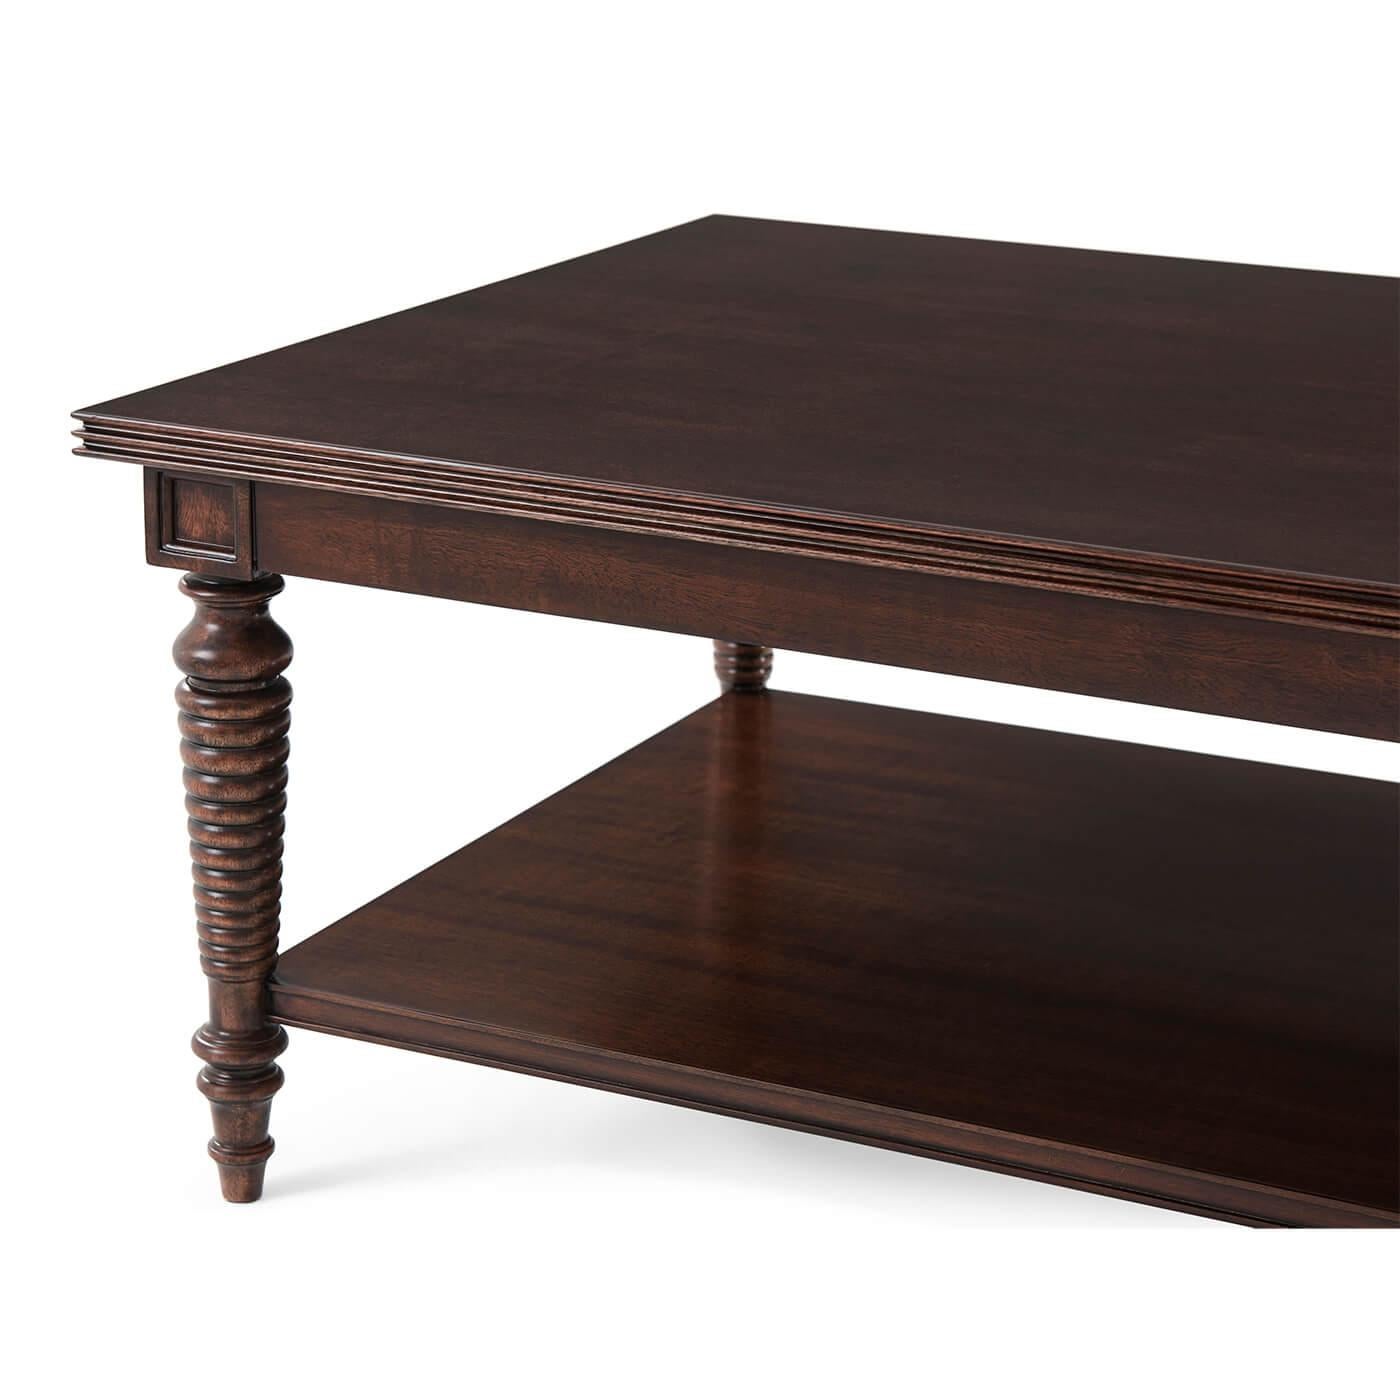 A Regency style, Anglo Indian influenced coffee table with turned and tapering bobbin legs and peg feet, evoking a British West Indies colonial vibe. The rectangular reeded-edge coffee tabletop offers ample surface space, matched with a lower tier